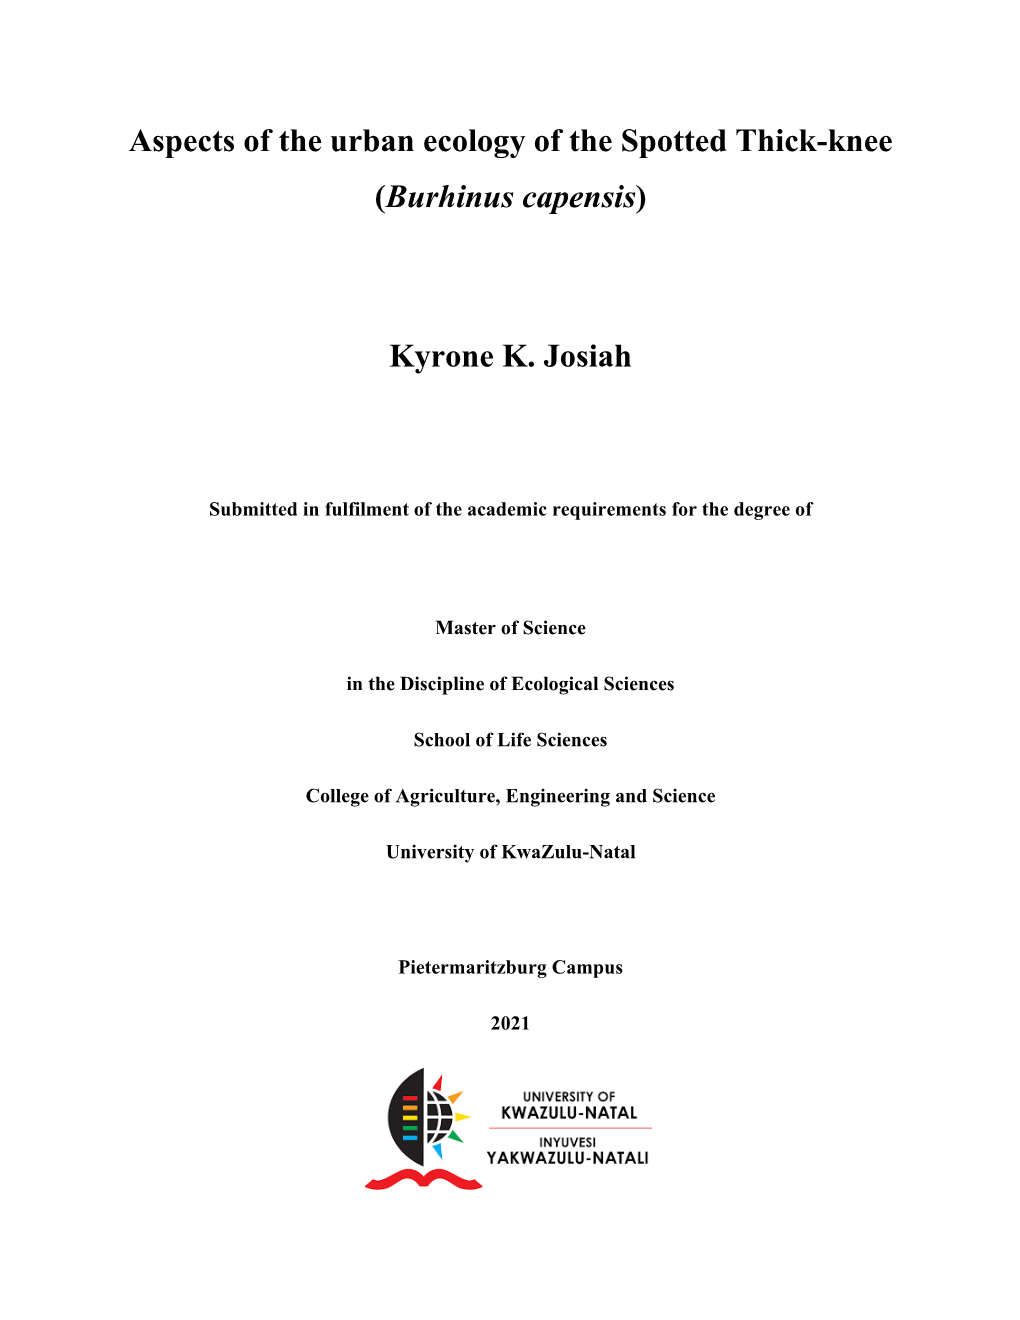 Aspects of the Urban Ecology of the Spotted Thick-Knee (Burhinus Capensis) Kyrone K. Josiah